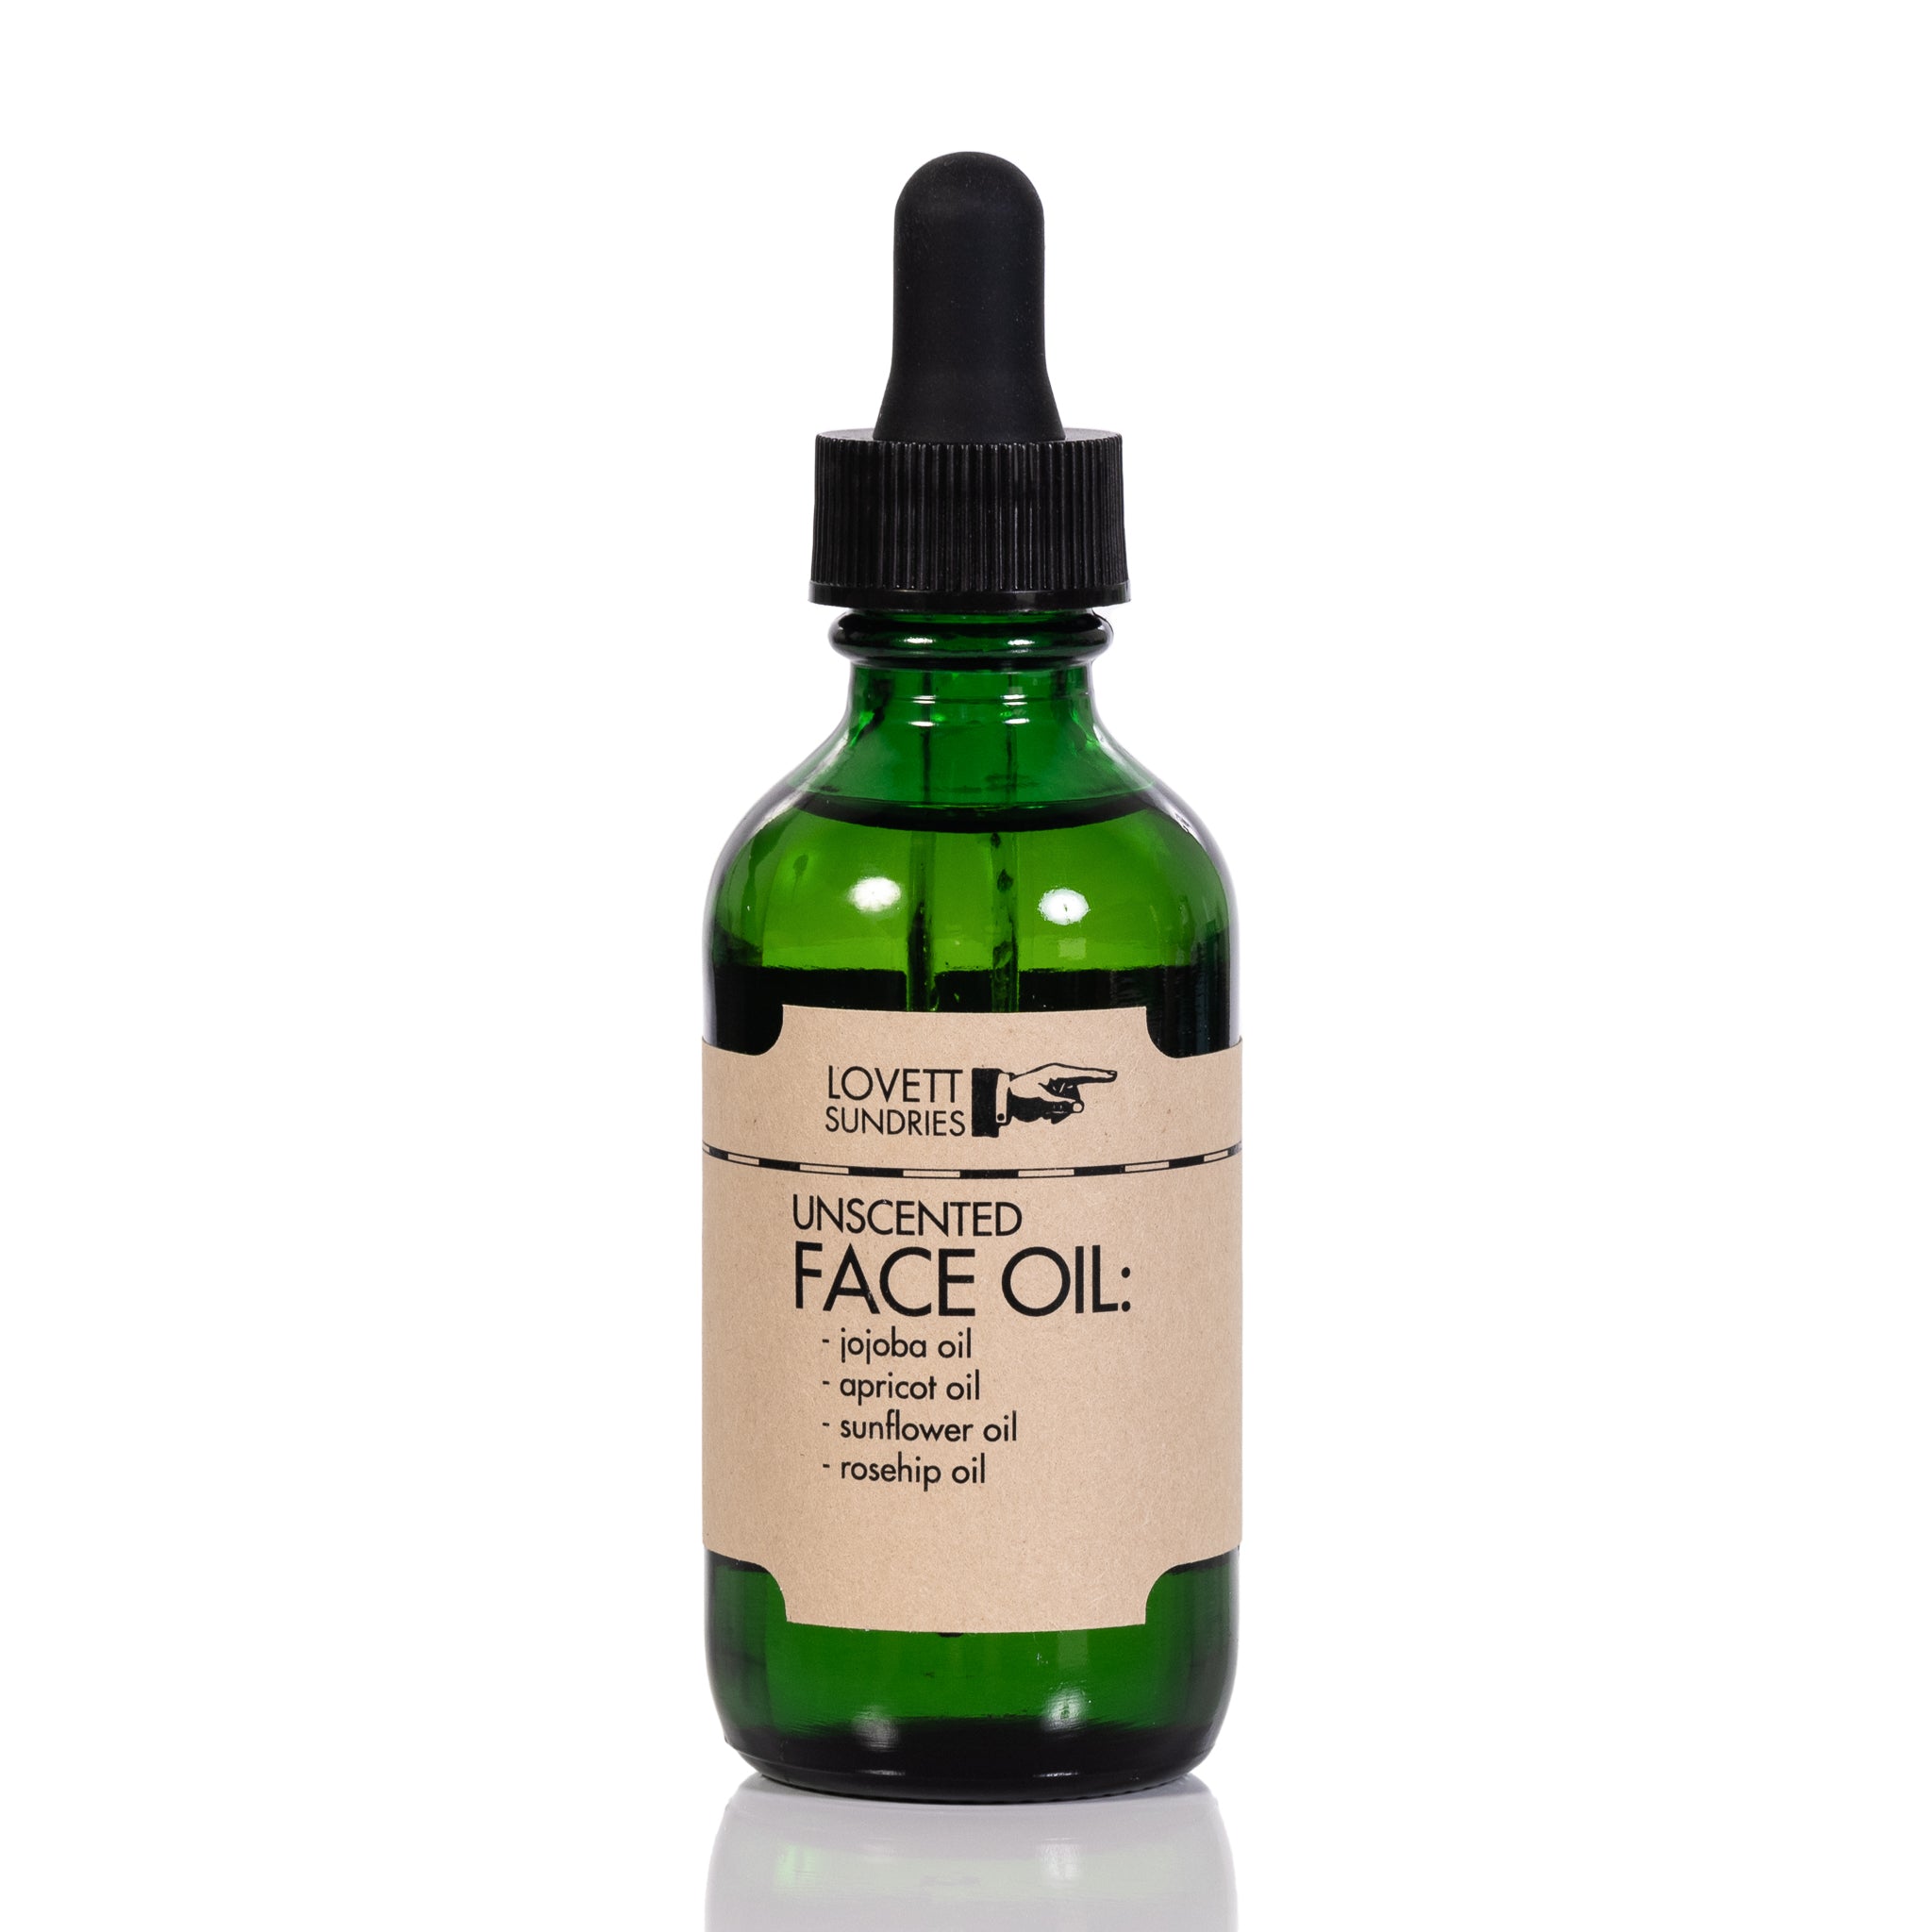 A bottle of unscented face oil